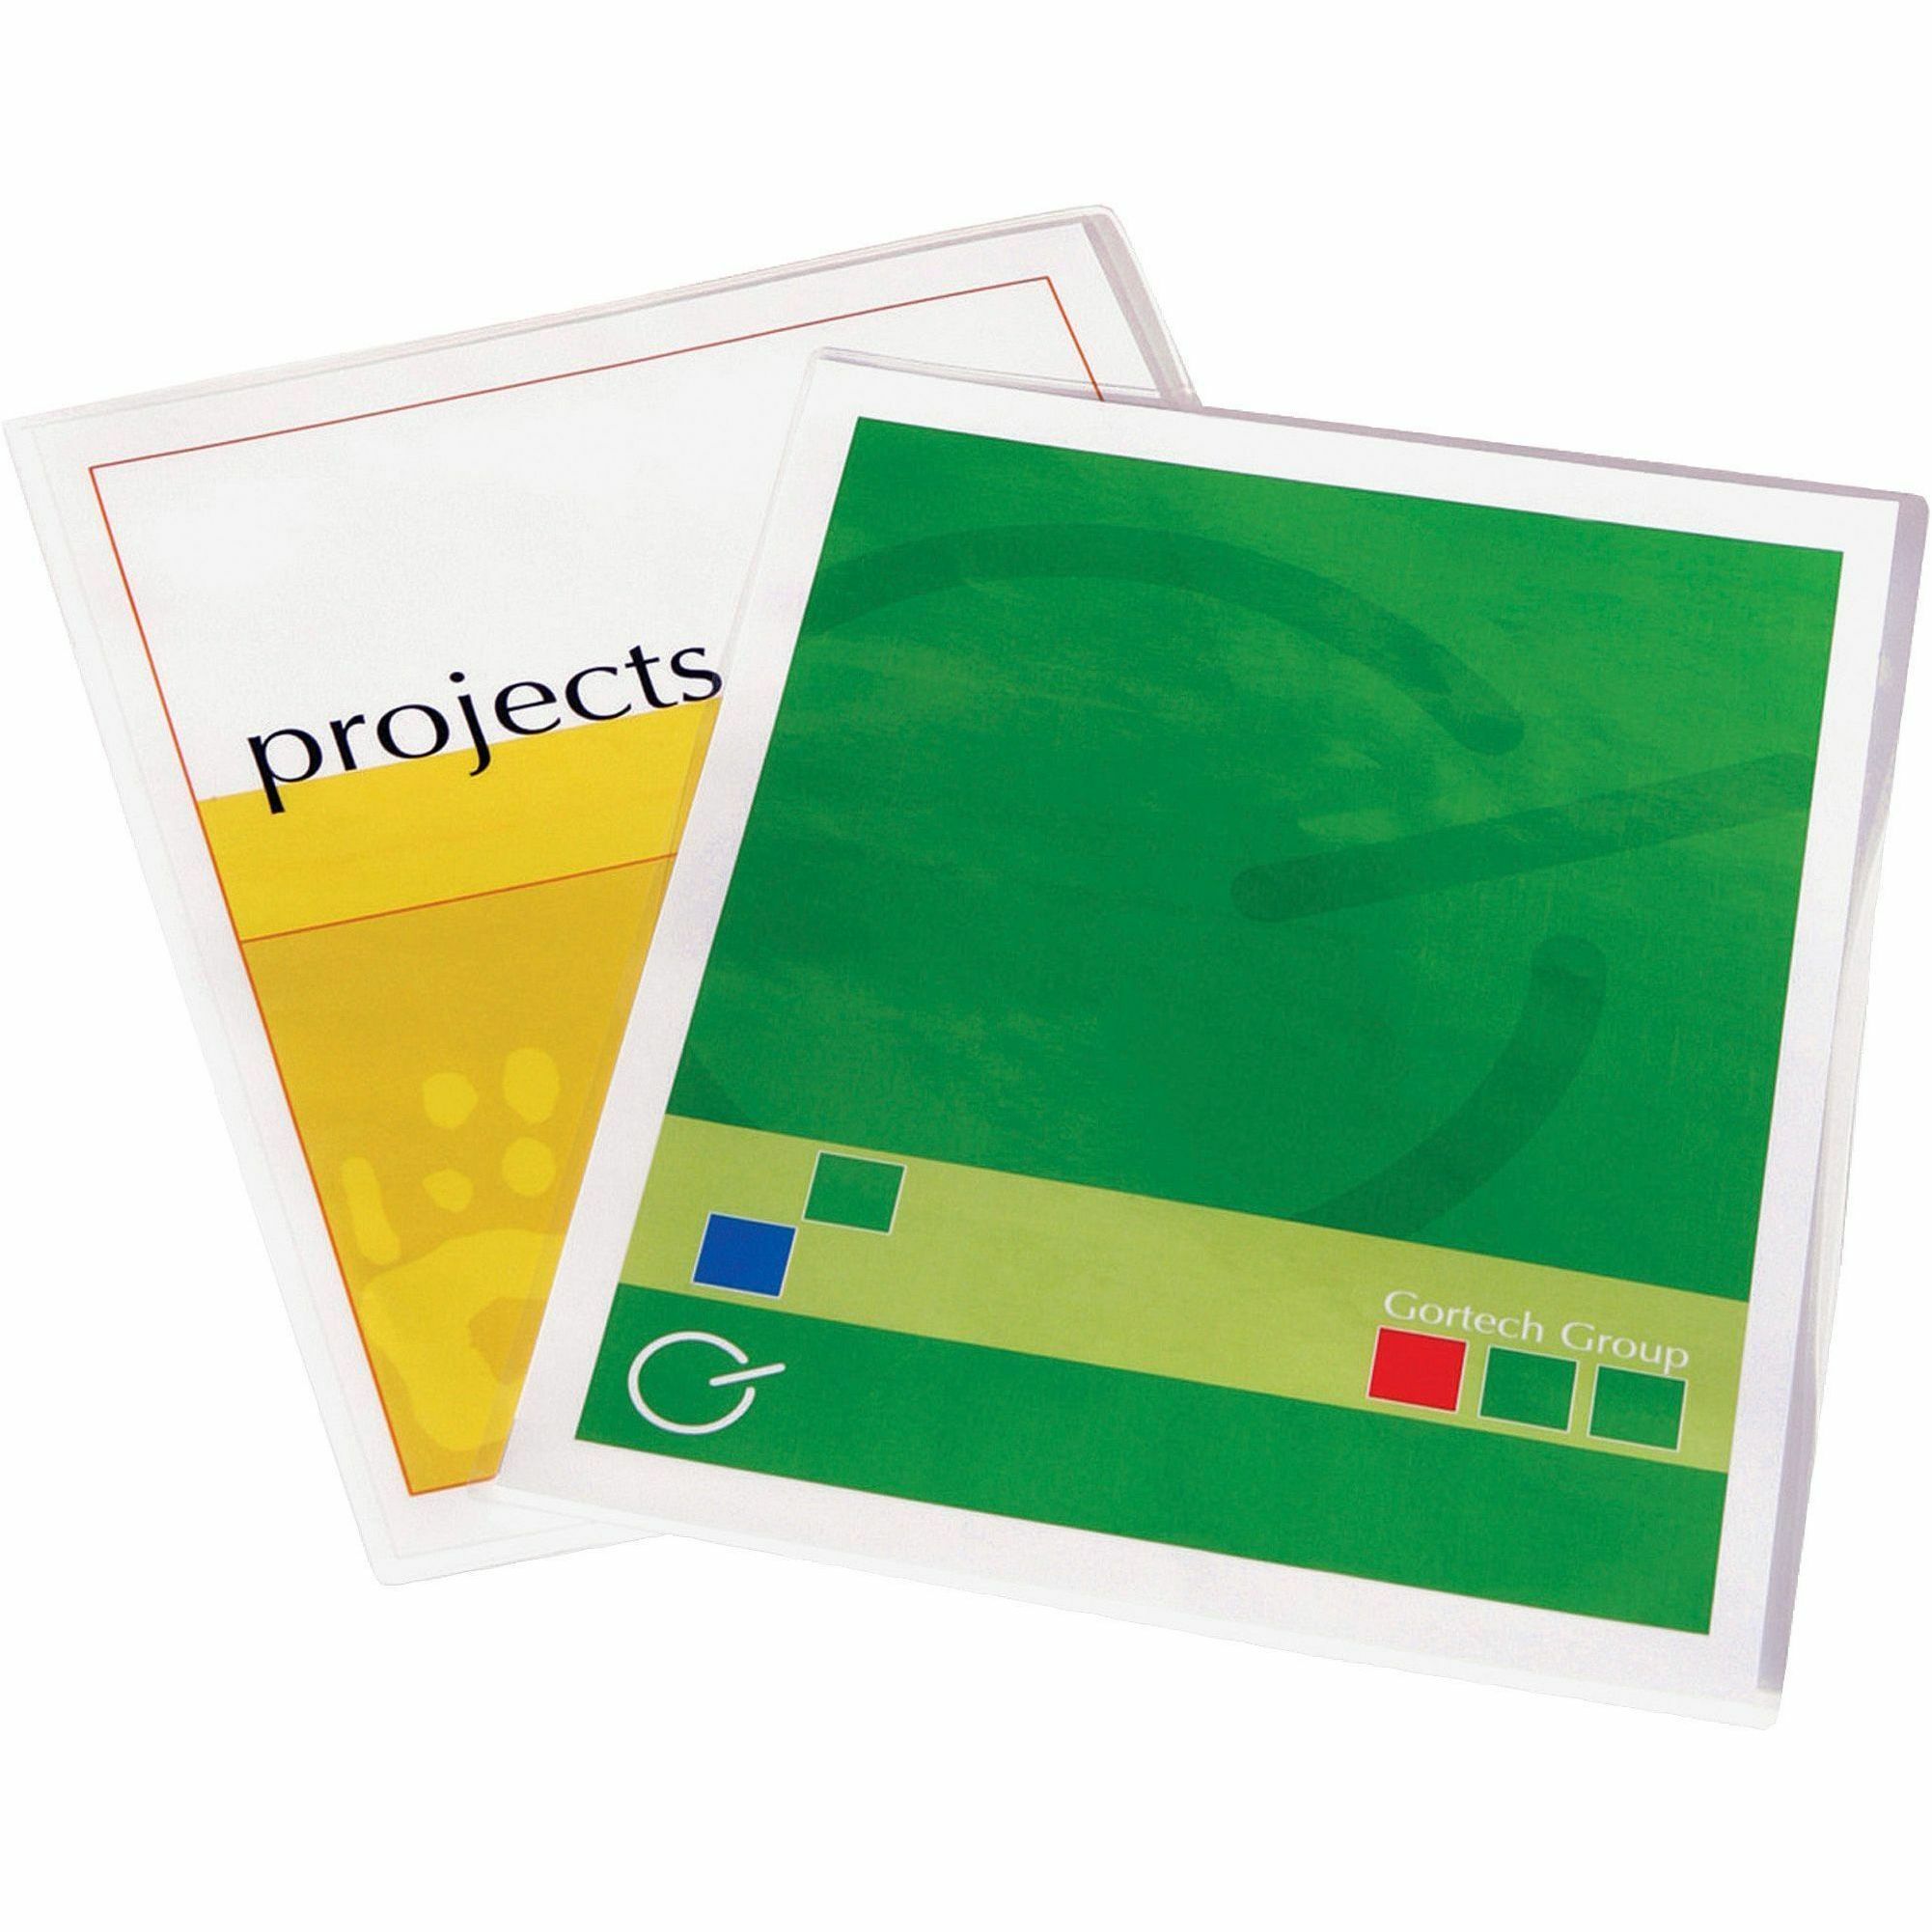 Fellowes Self Adhesive Laminating Sheets 9.25 x 12 3 mil Clear